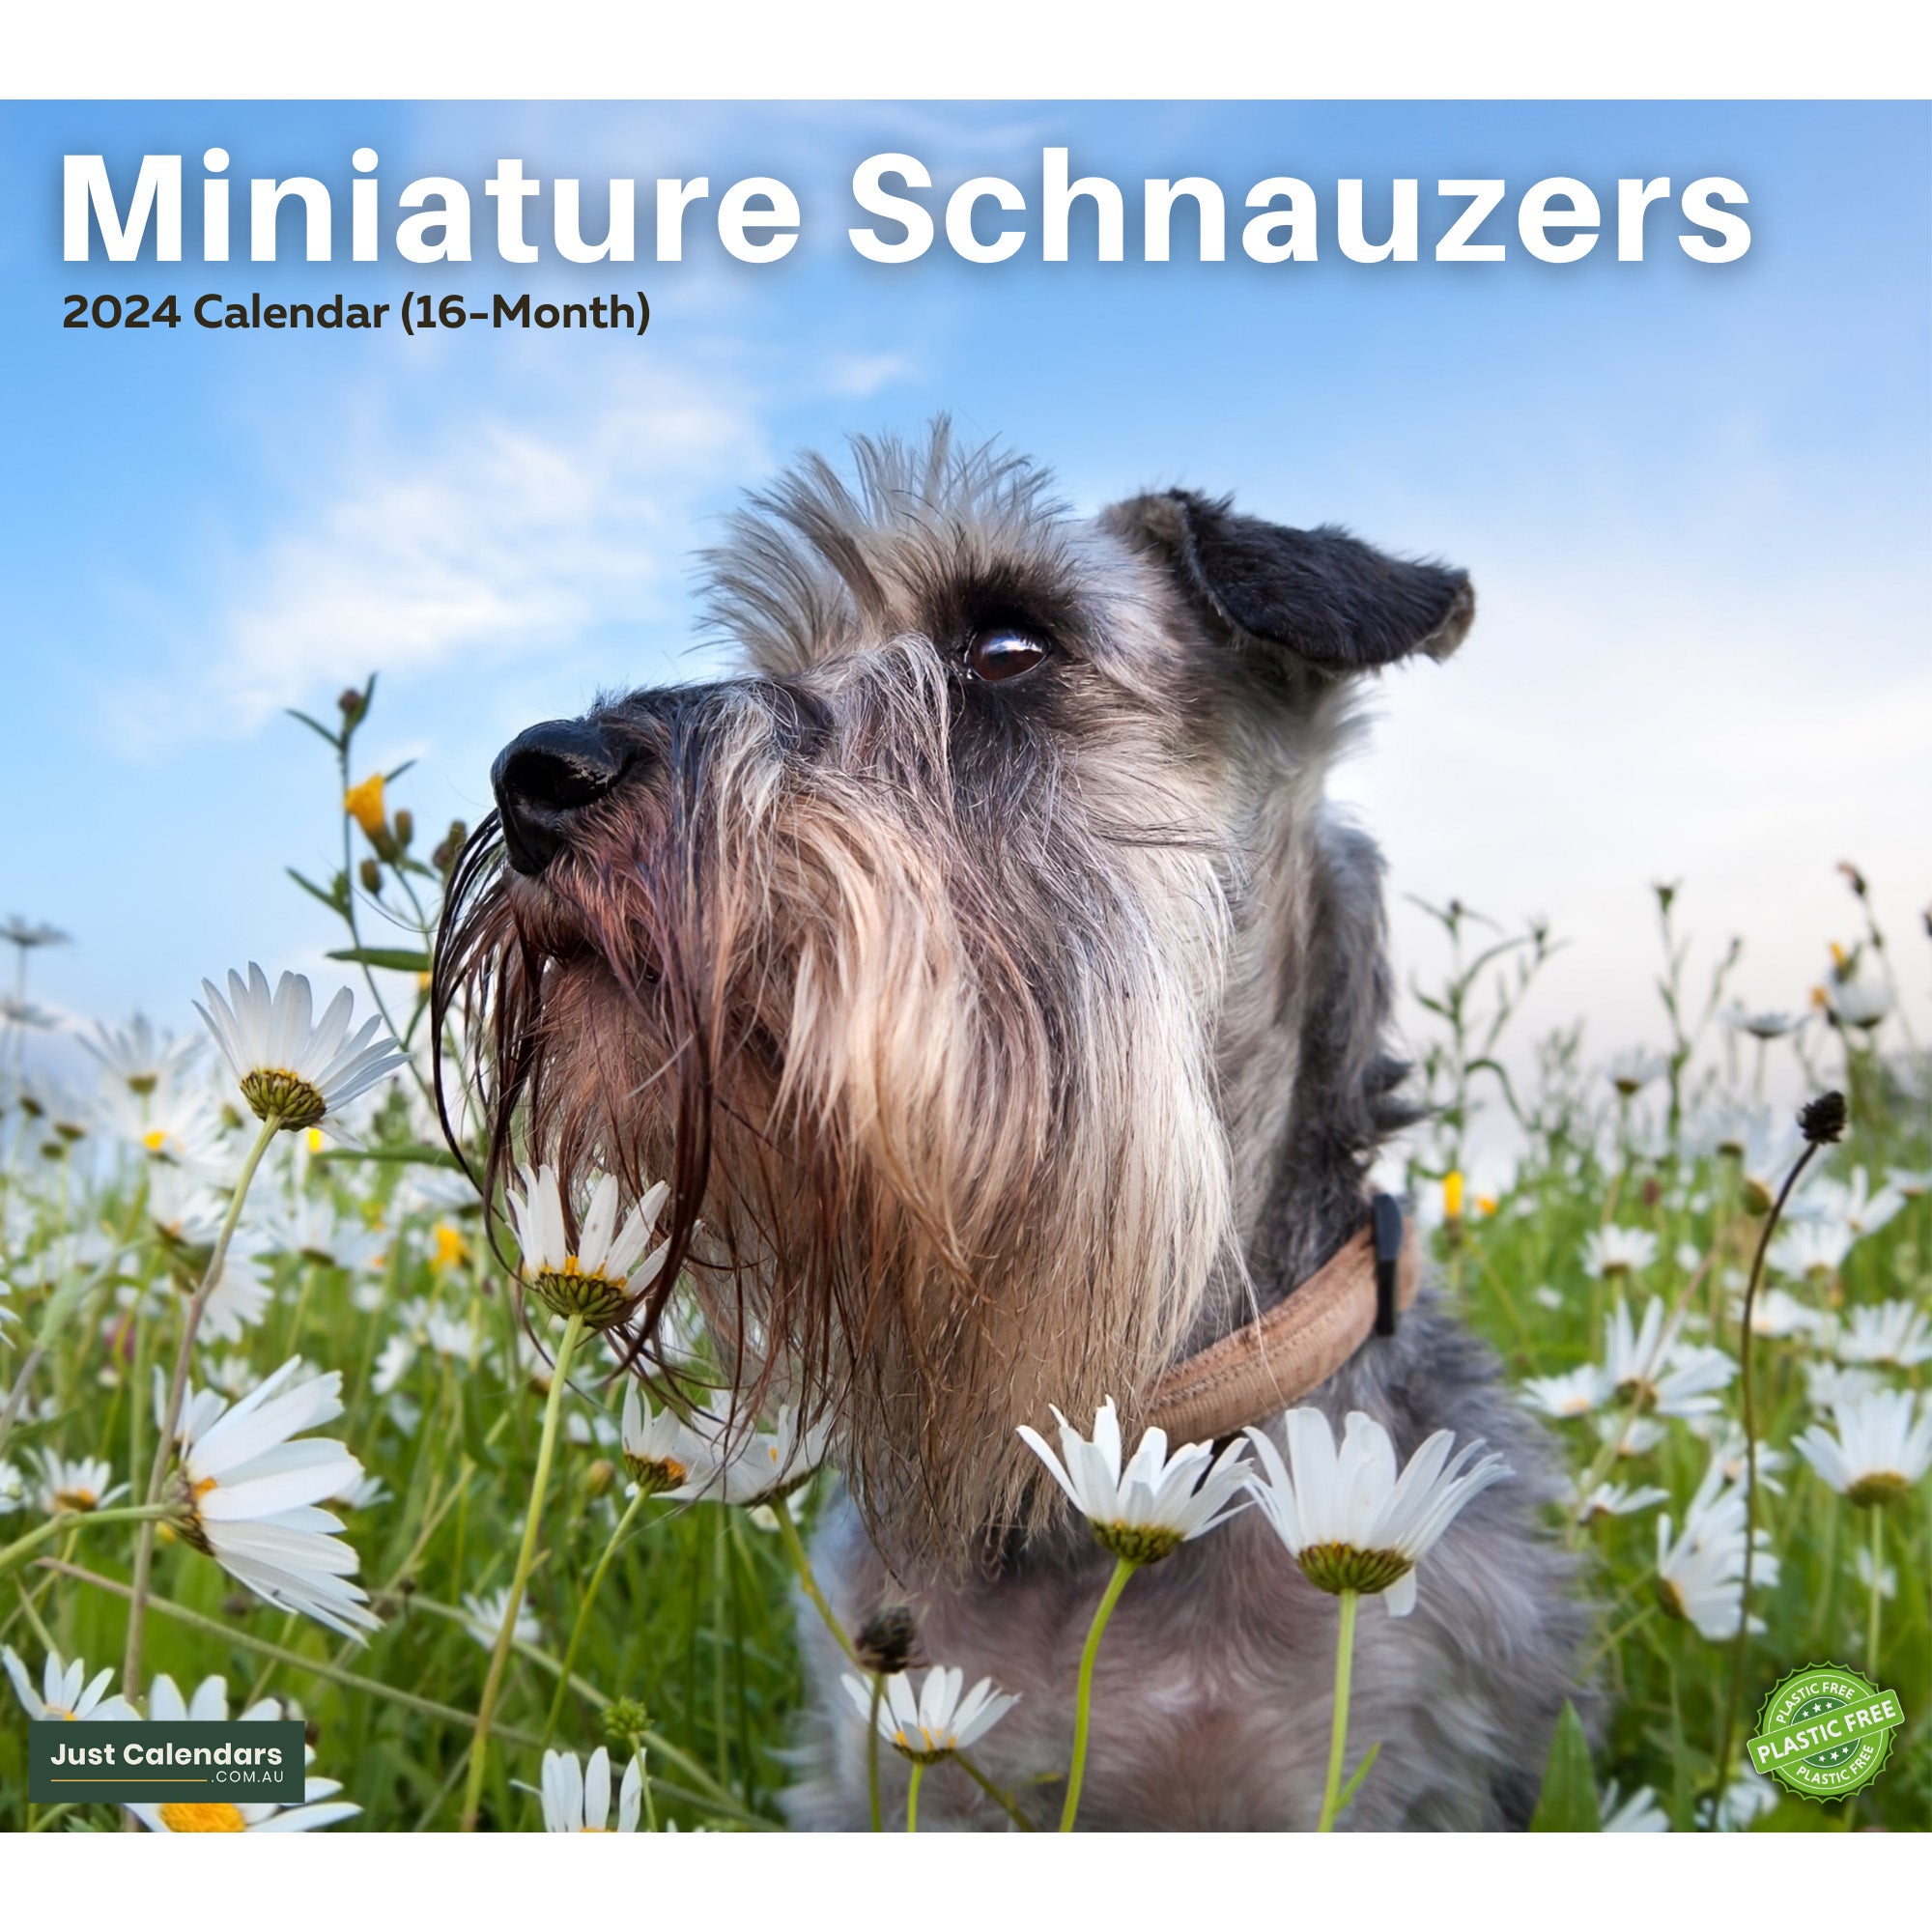 2024 Miniature Schnauzers Dogs & Puppies - Deluxe Wall Calendar by Just Calendars - 16 Month - Plastic Free